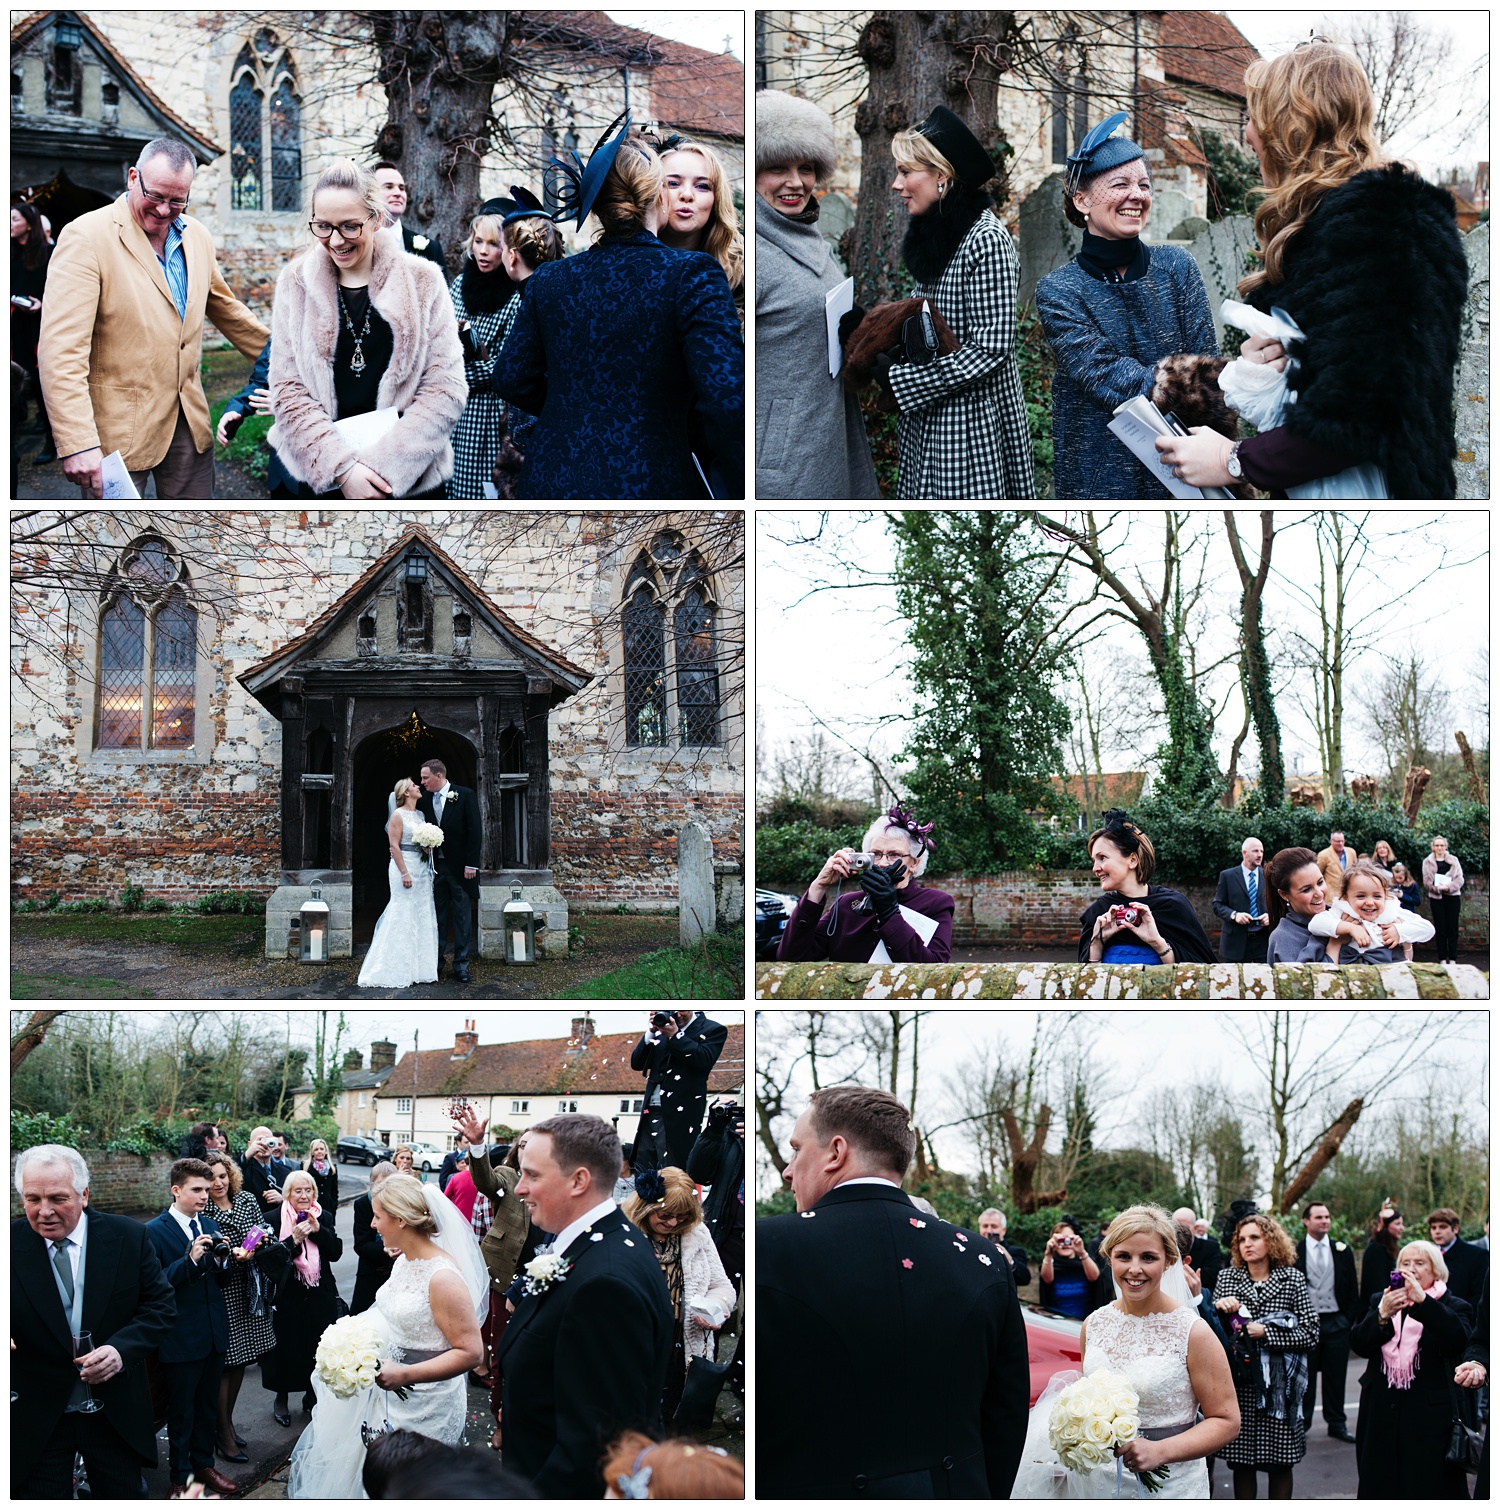 Outside St Thomas' Church Bradwell-on-Sea on a cold January day wedding guests greet each other after a wedding.